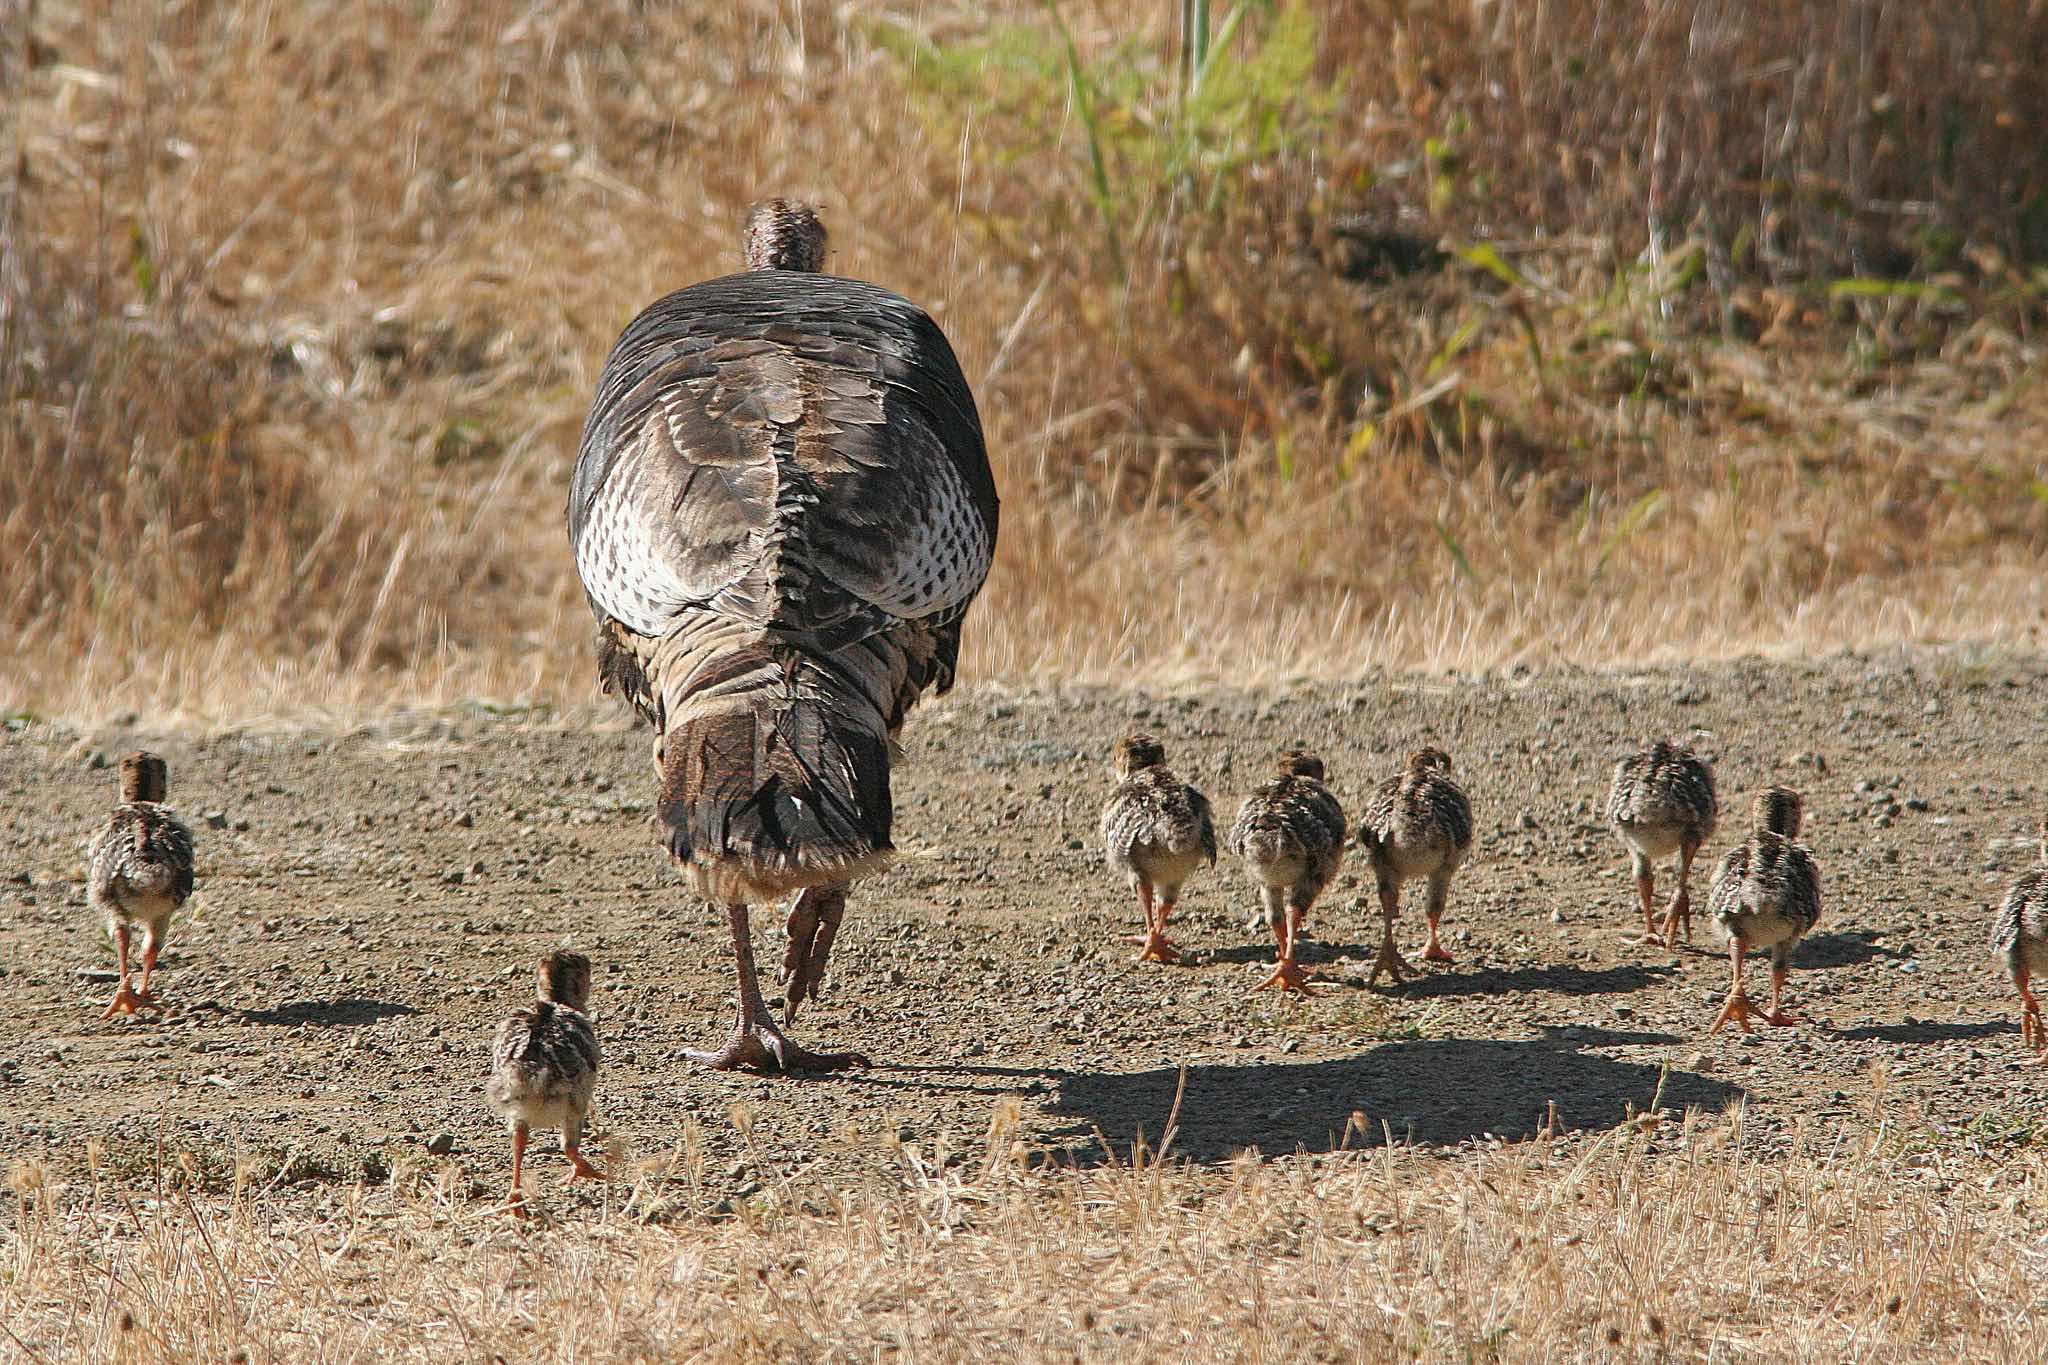 Wild turkey mom with chicks. (Alan Schmierer / Flickr Creative Commons)